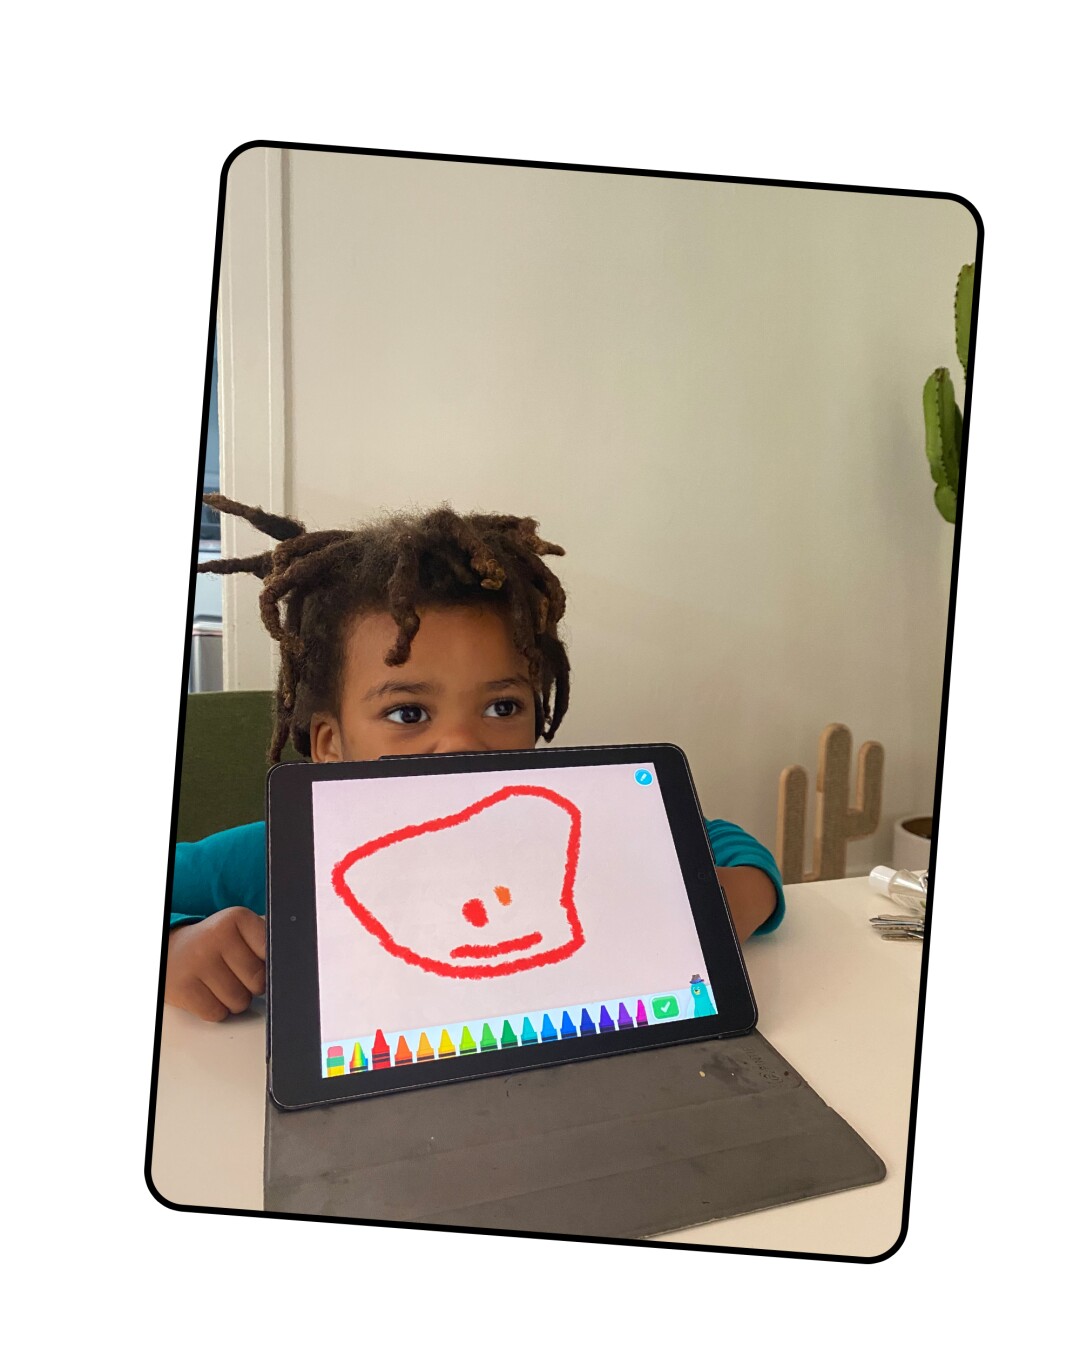 A young child holds up a drawing pad with a picture on it.